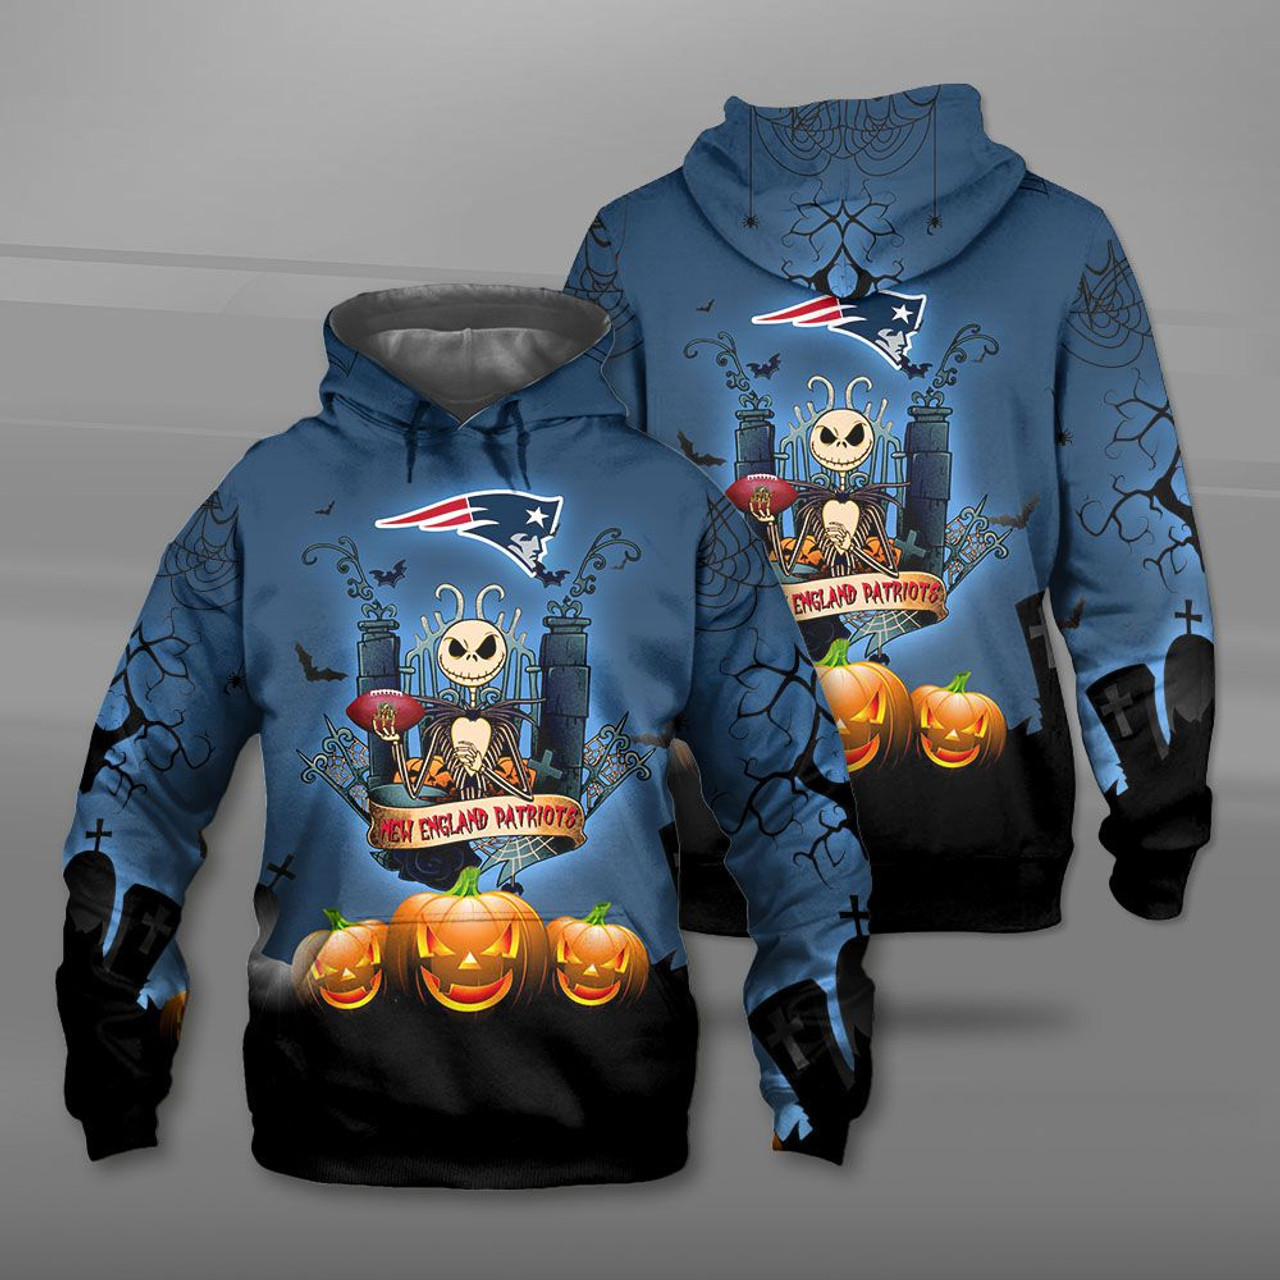 **(OFFICIAL-N.F.L.NEW-ENGLAND-PATRIOTS-TEAM-PULLOVER-HOODIES/CUSTOM-3D-PATRIOTS-OFFICIAL-LOGOS & OFFICIAL-CLASSIC-PATRIOTS-TEAM-COLORS/DETAILED-3D-GRAPHIC-PRINTED-DOUBLE-SIDED-DESIGN/PREMIUM-N.F.L.PATRIOTS-HALLOWEEN-NIGHTMARE-THEMED-HOODIES)**